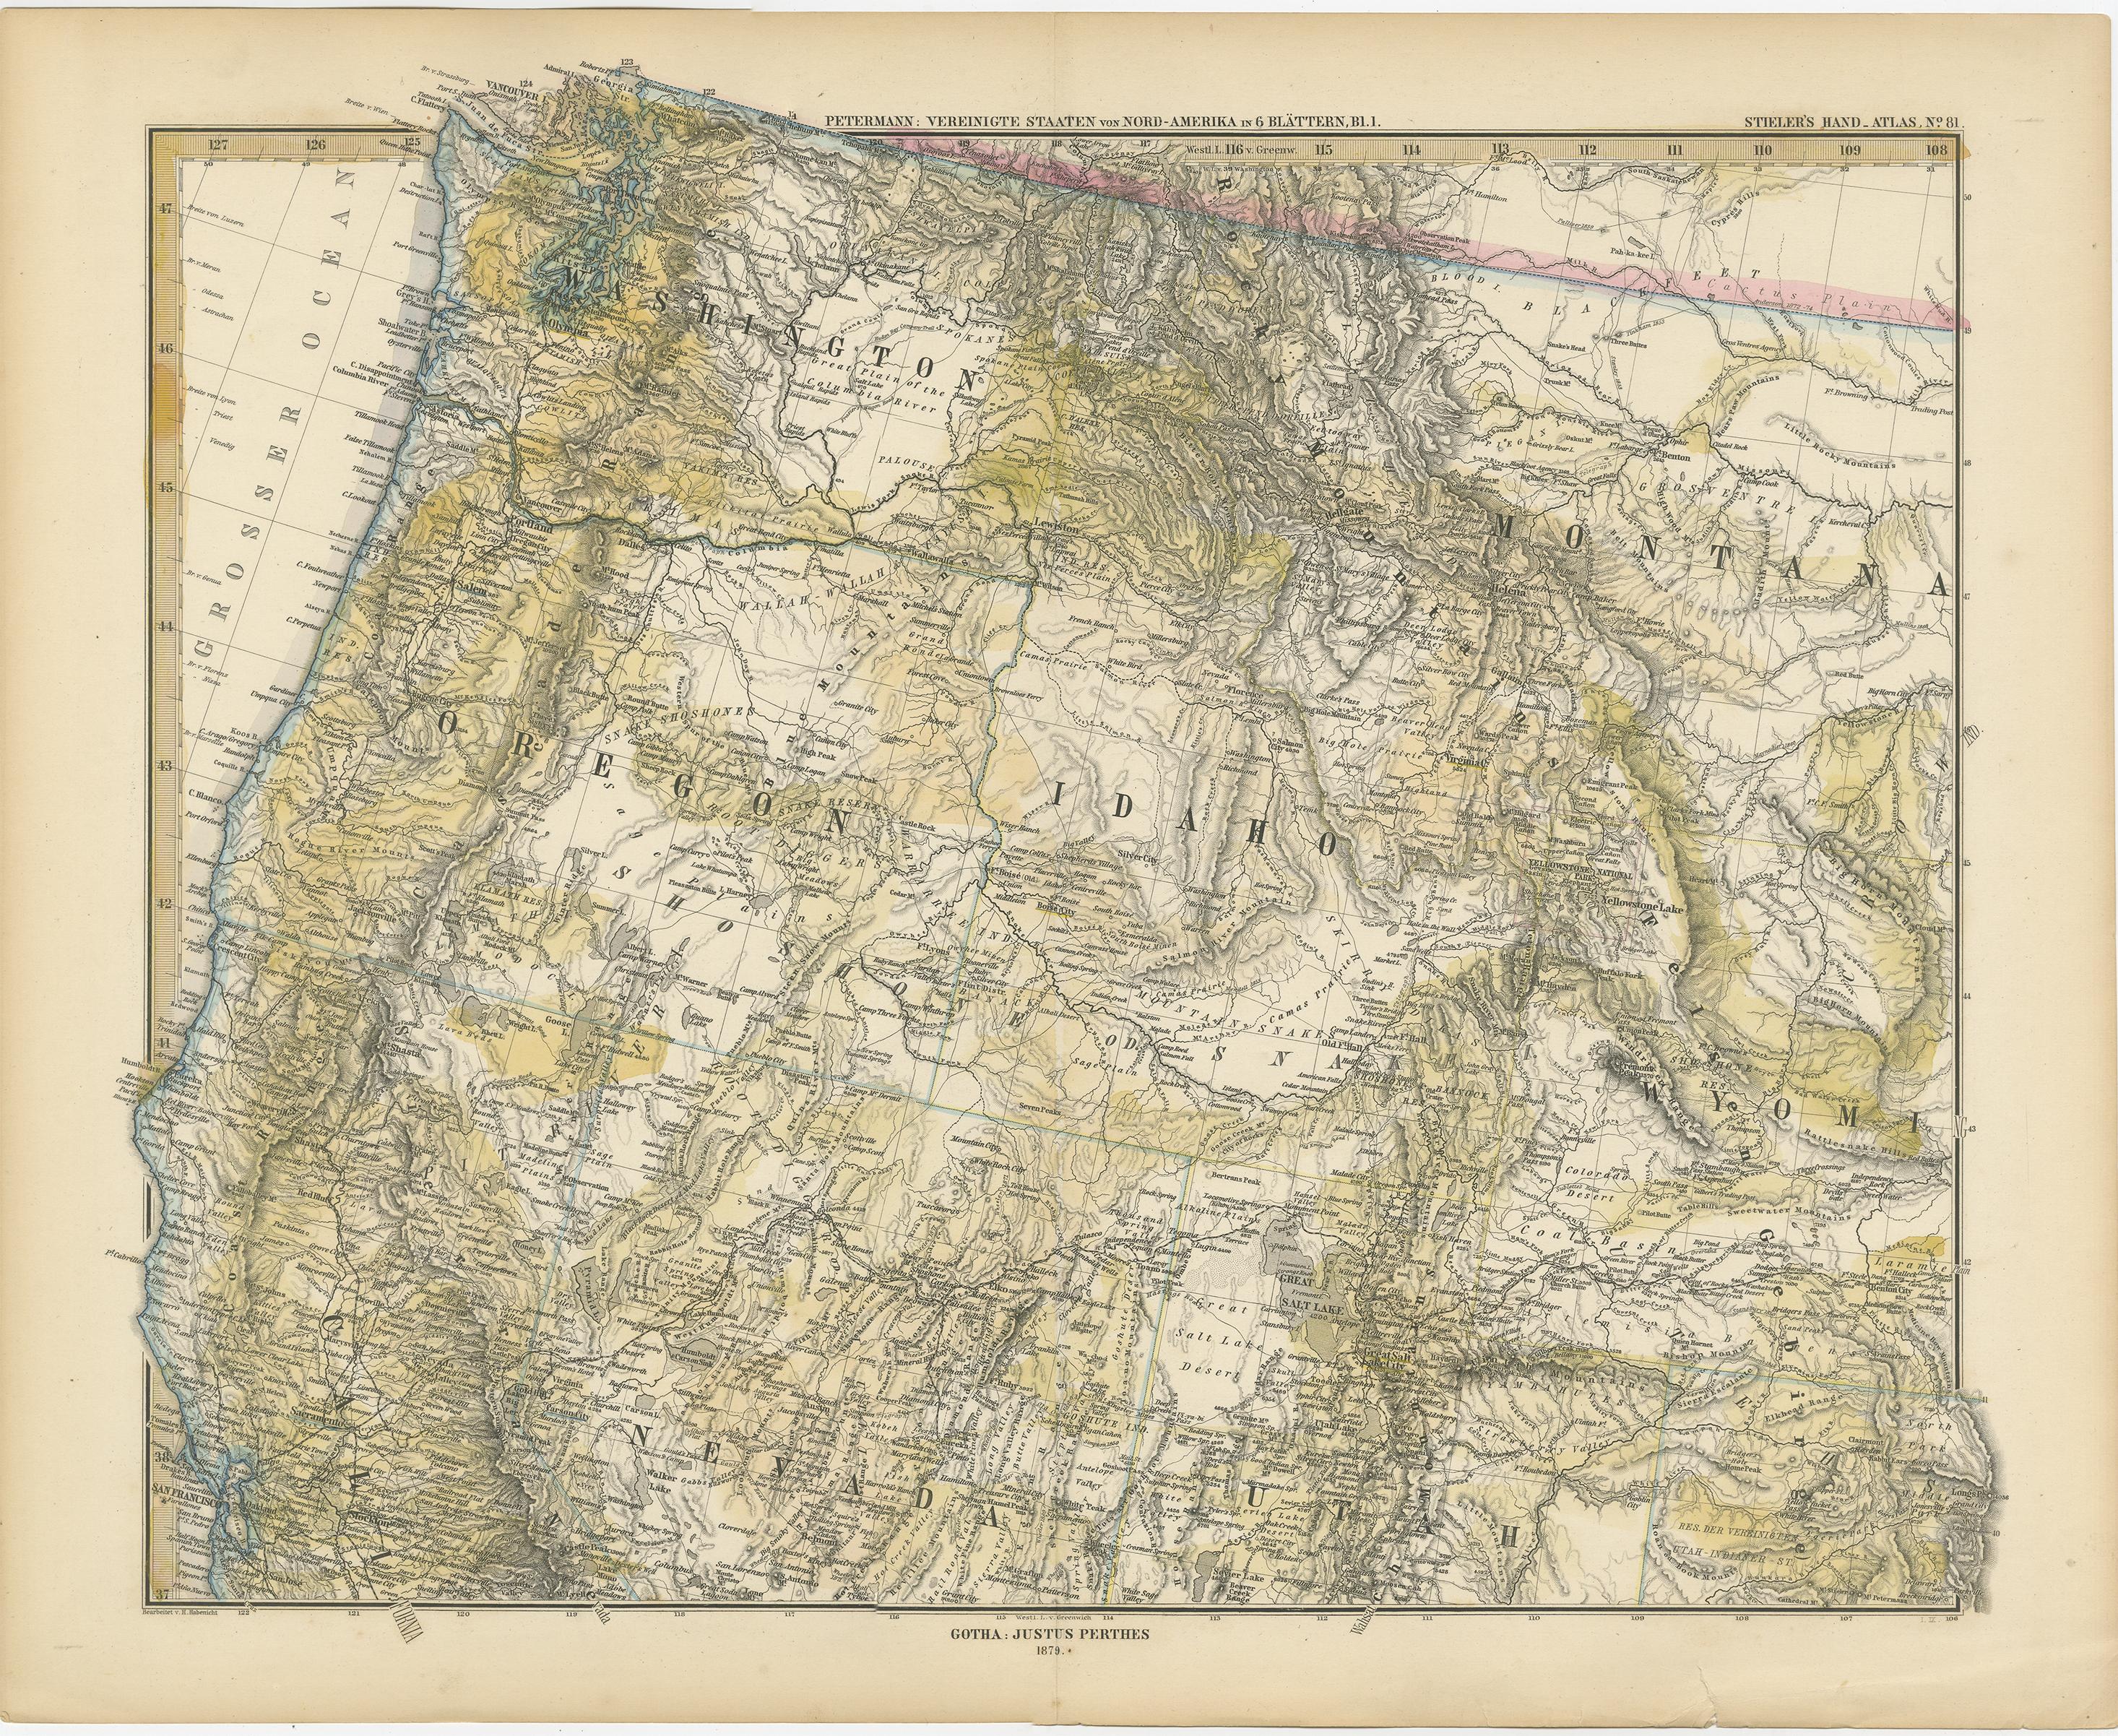 Set of two individual antique maps of part of the United States. It shows the region and surroundings of Oregon, Idaho, Wyoming, Nebraska, Iowa, Dakota and Wisconsin. Published as part of a set of six individual maps. 

These maps originate from